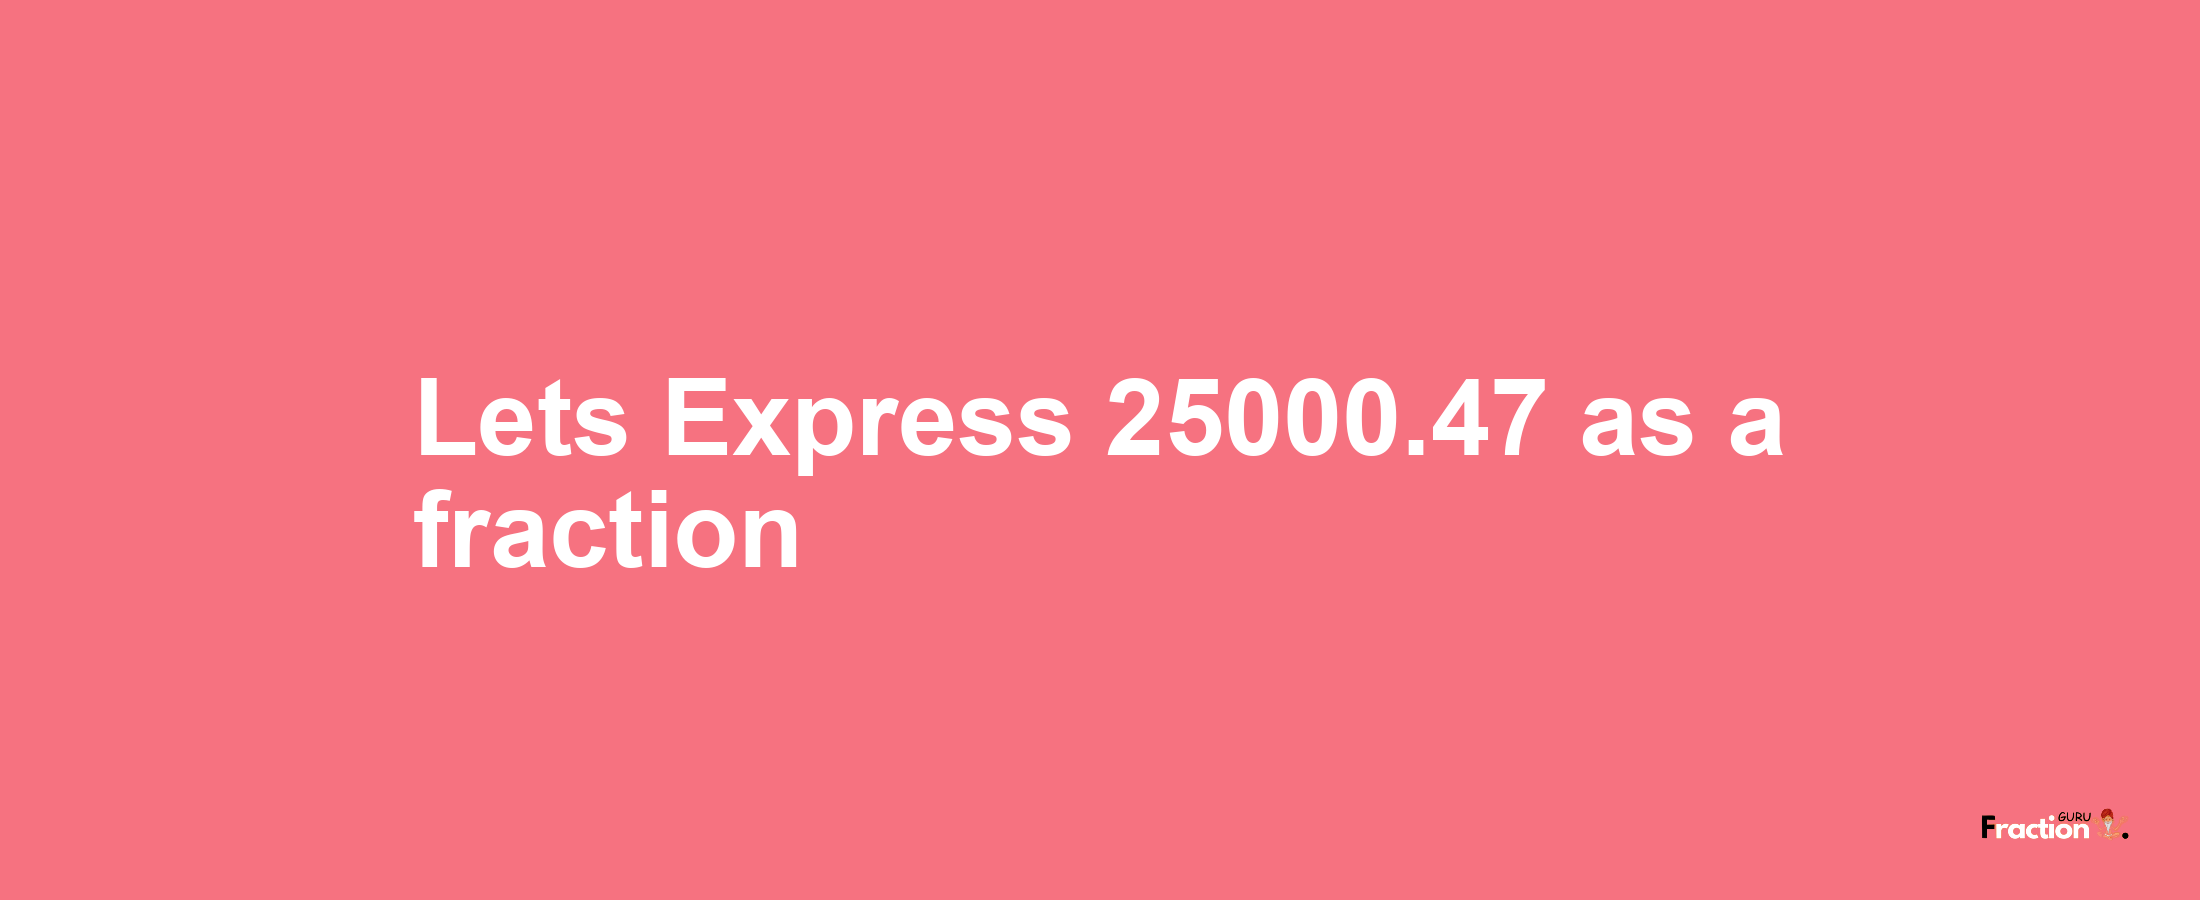 Lets Express 25000.47 as afraction